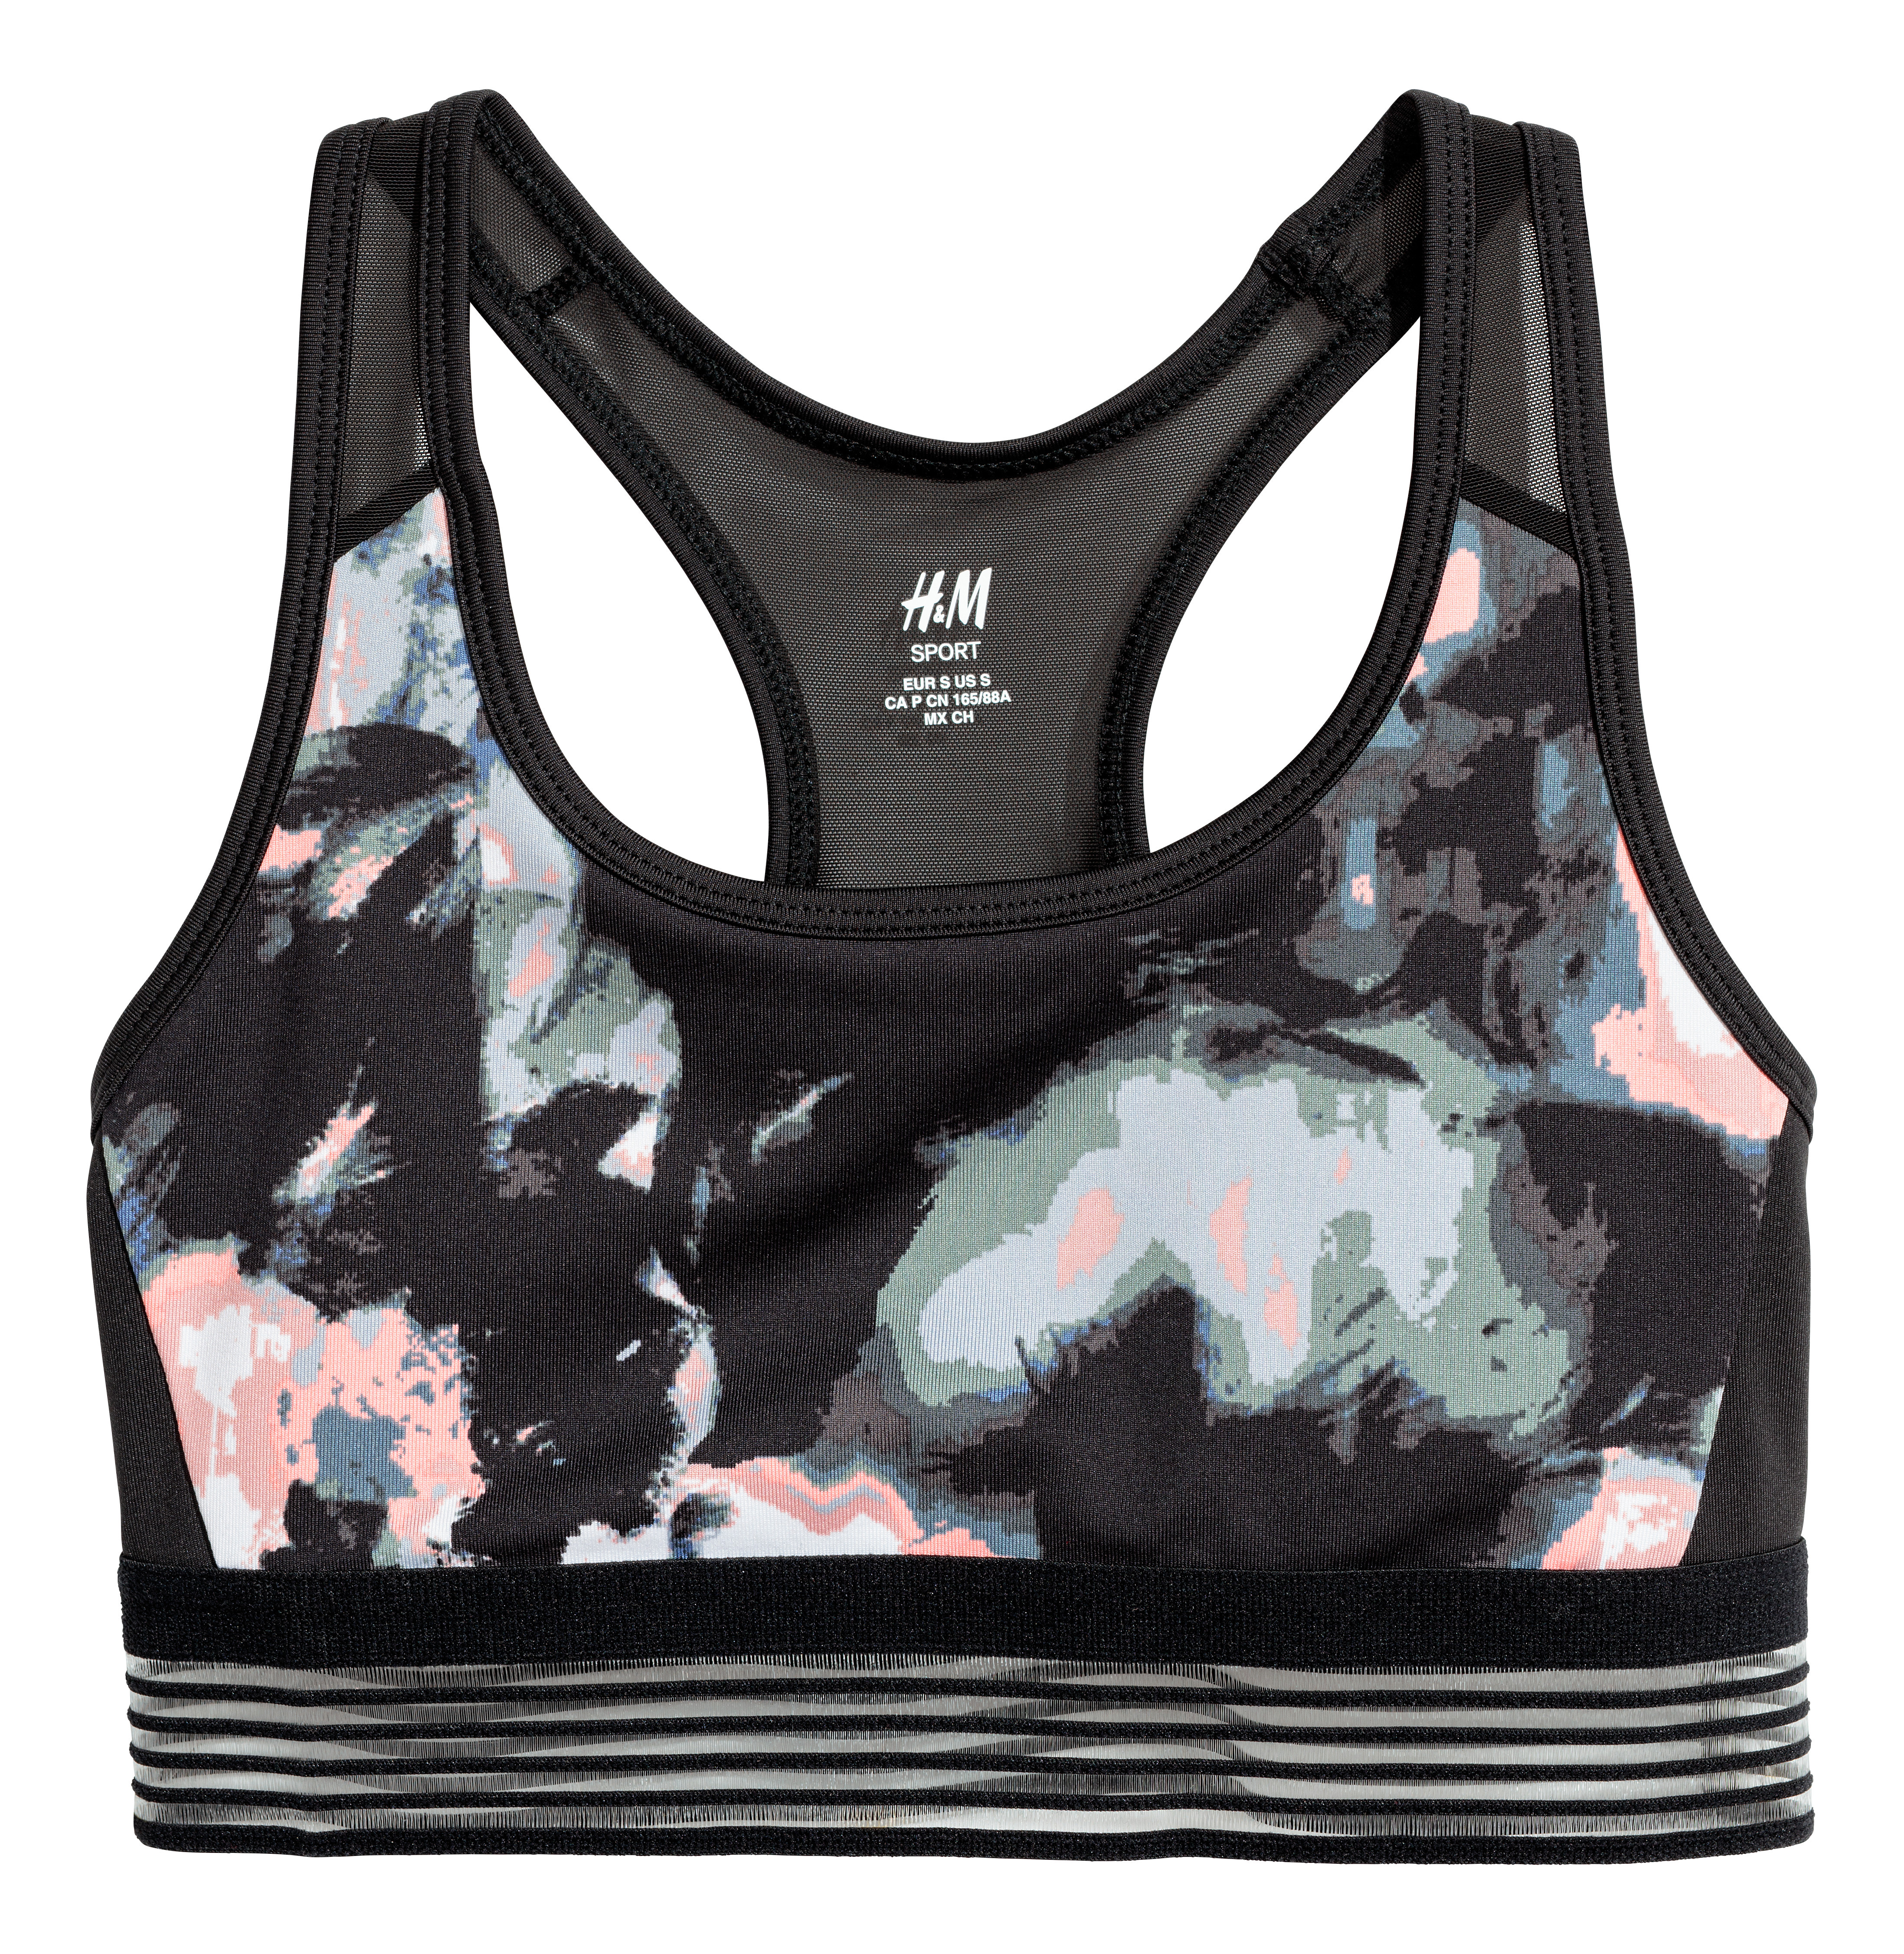 H&M’s Fashion-Forward and Conscious-Led Activewear Collection ‹ Fashion ...